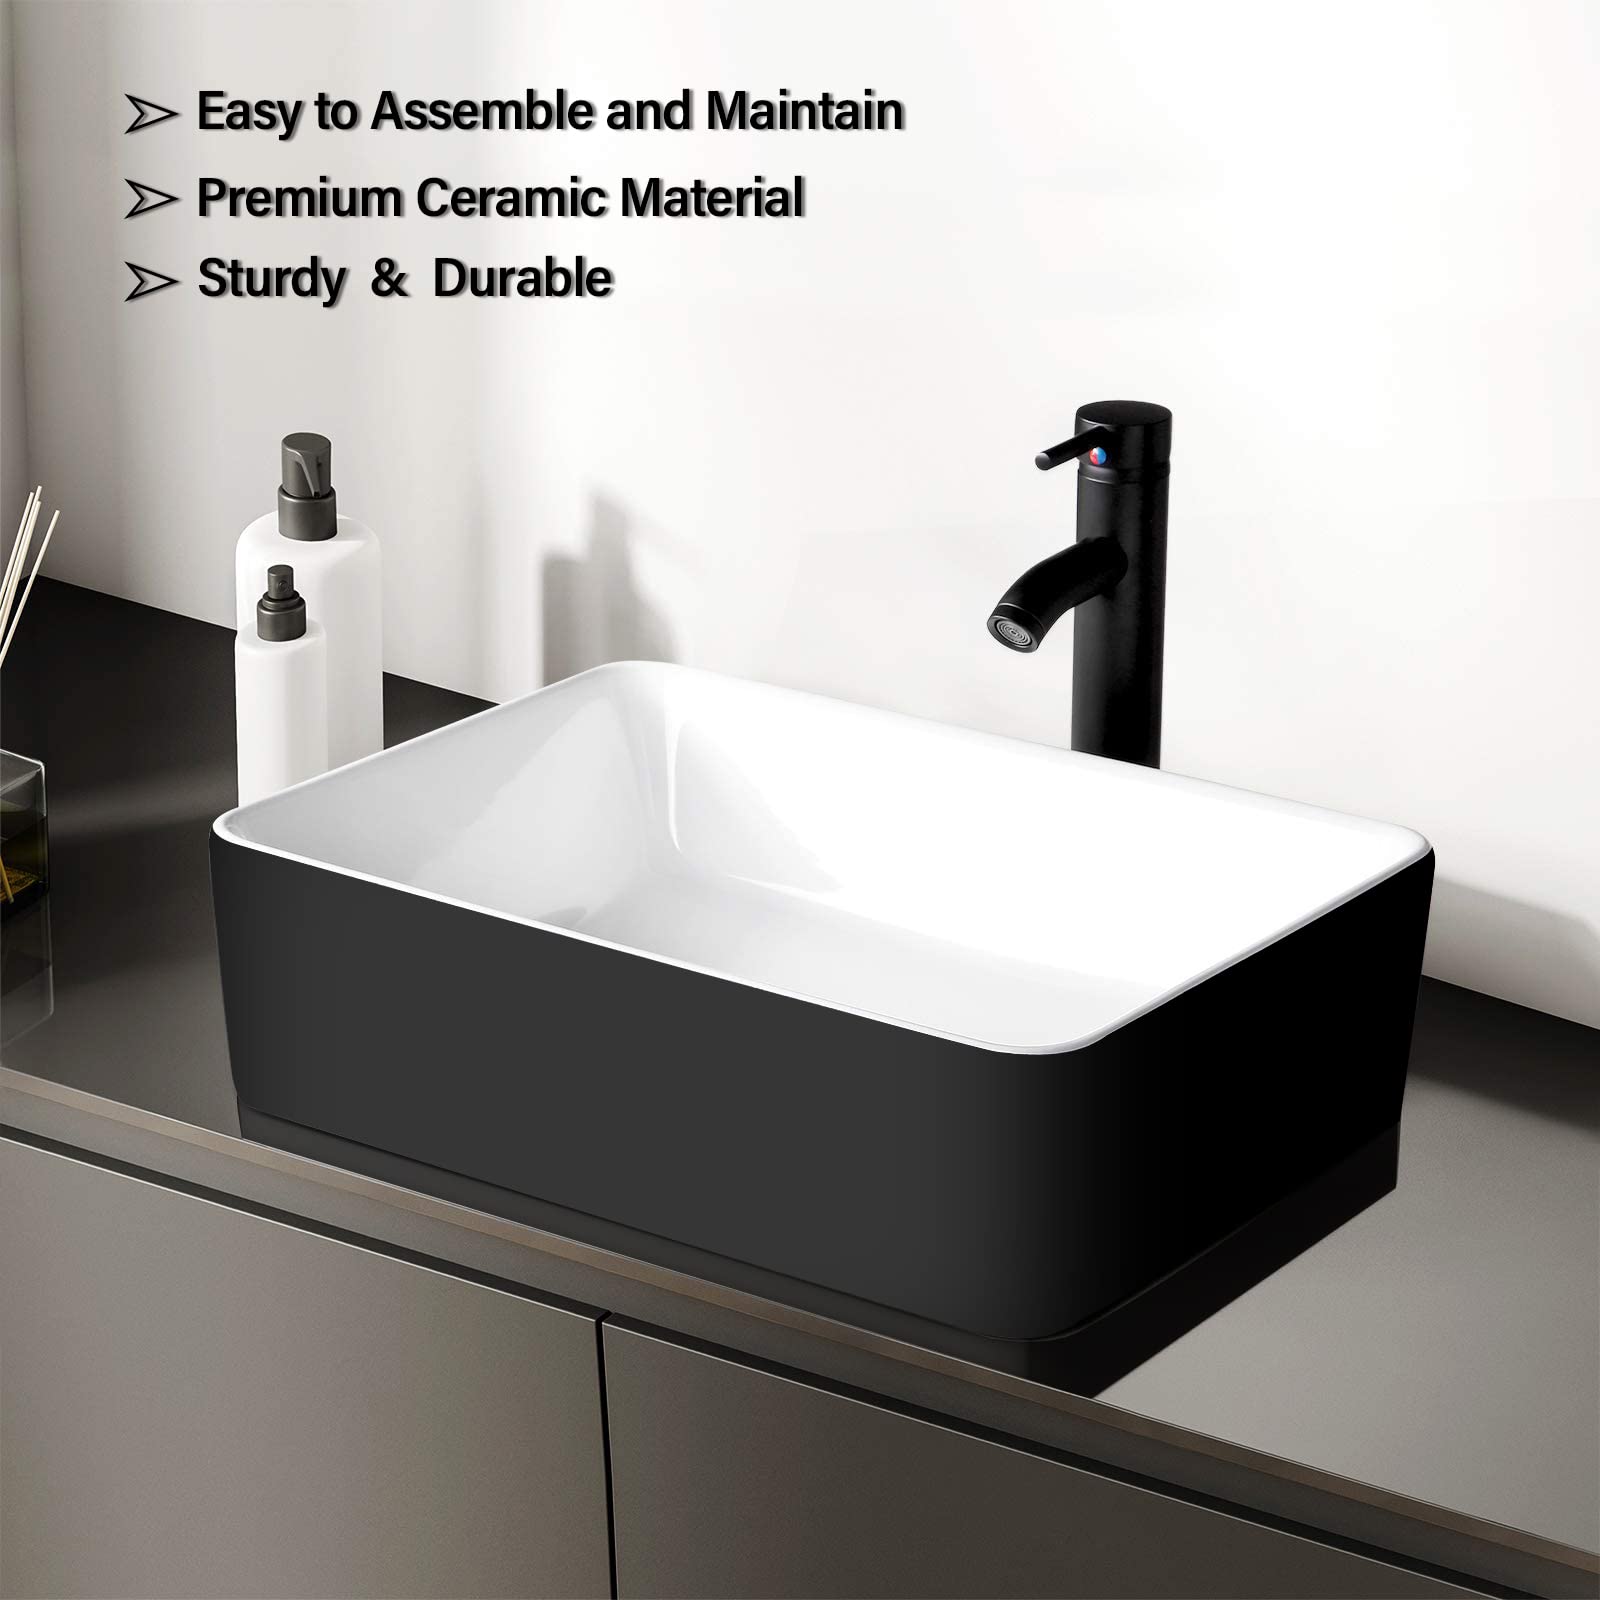 KGAR Rectangular Bathroom Sink, 19" x 15" Above Counter Porcelain Ceramic Vessel Sink with Faucet and Pop up Drain Combo,Black and White